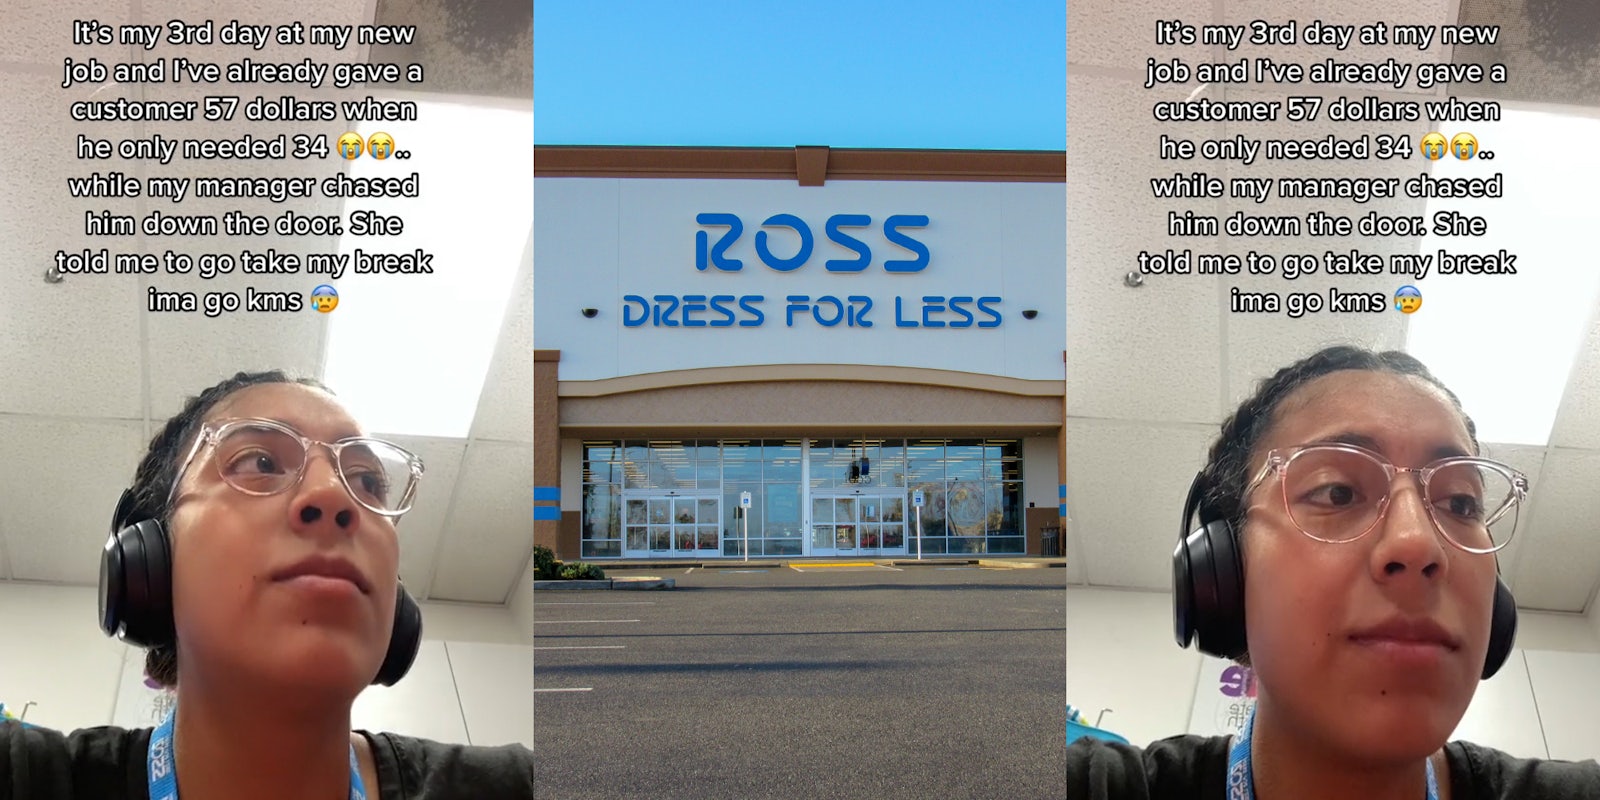 Ross employee caption 'It's my 3rd day at my new job and I've already gave a customer 57 dollars when he only needed 34... while my manager chased him down the door. She told me to take my break ima go kms' (l) Ross Dress For Less store front with sign (c) Ross employee caption 'It's my 3rd day at my new job and I've already gave a customer 57 dollars when he only needed 34... while my manager chased him down the door. She told me to take my break ima go kms' (r)